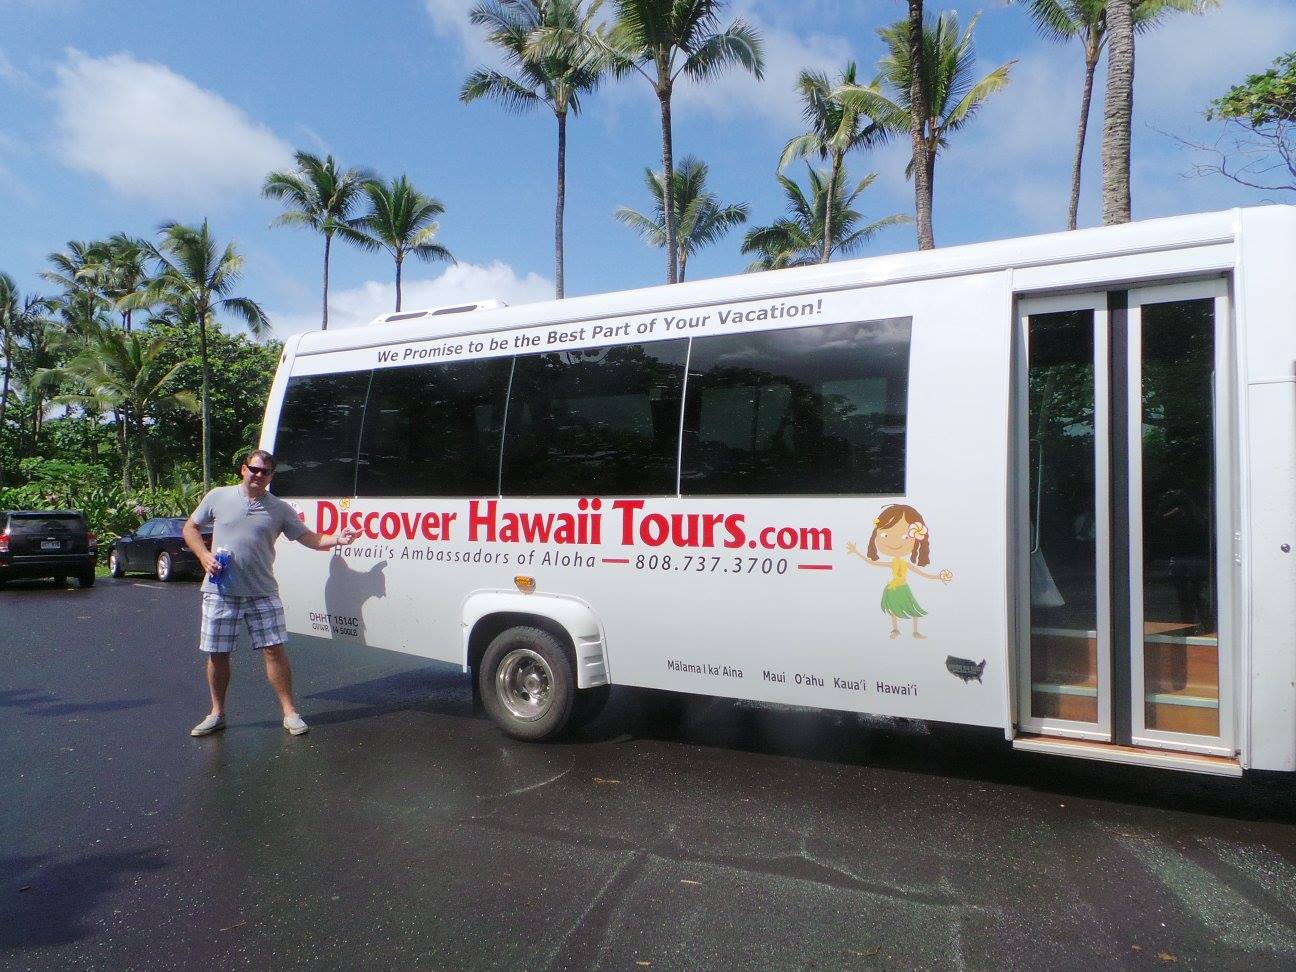 Google Glass On Vacation in Hawaii